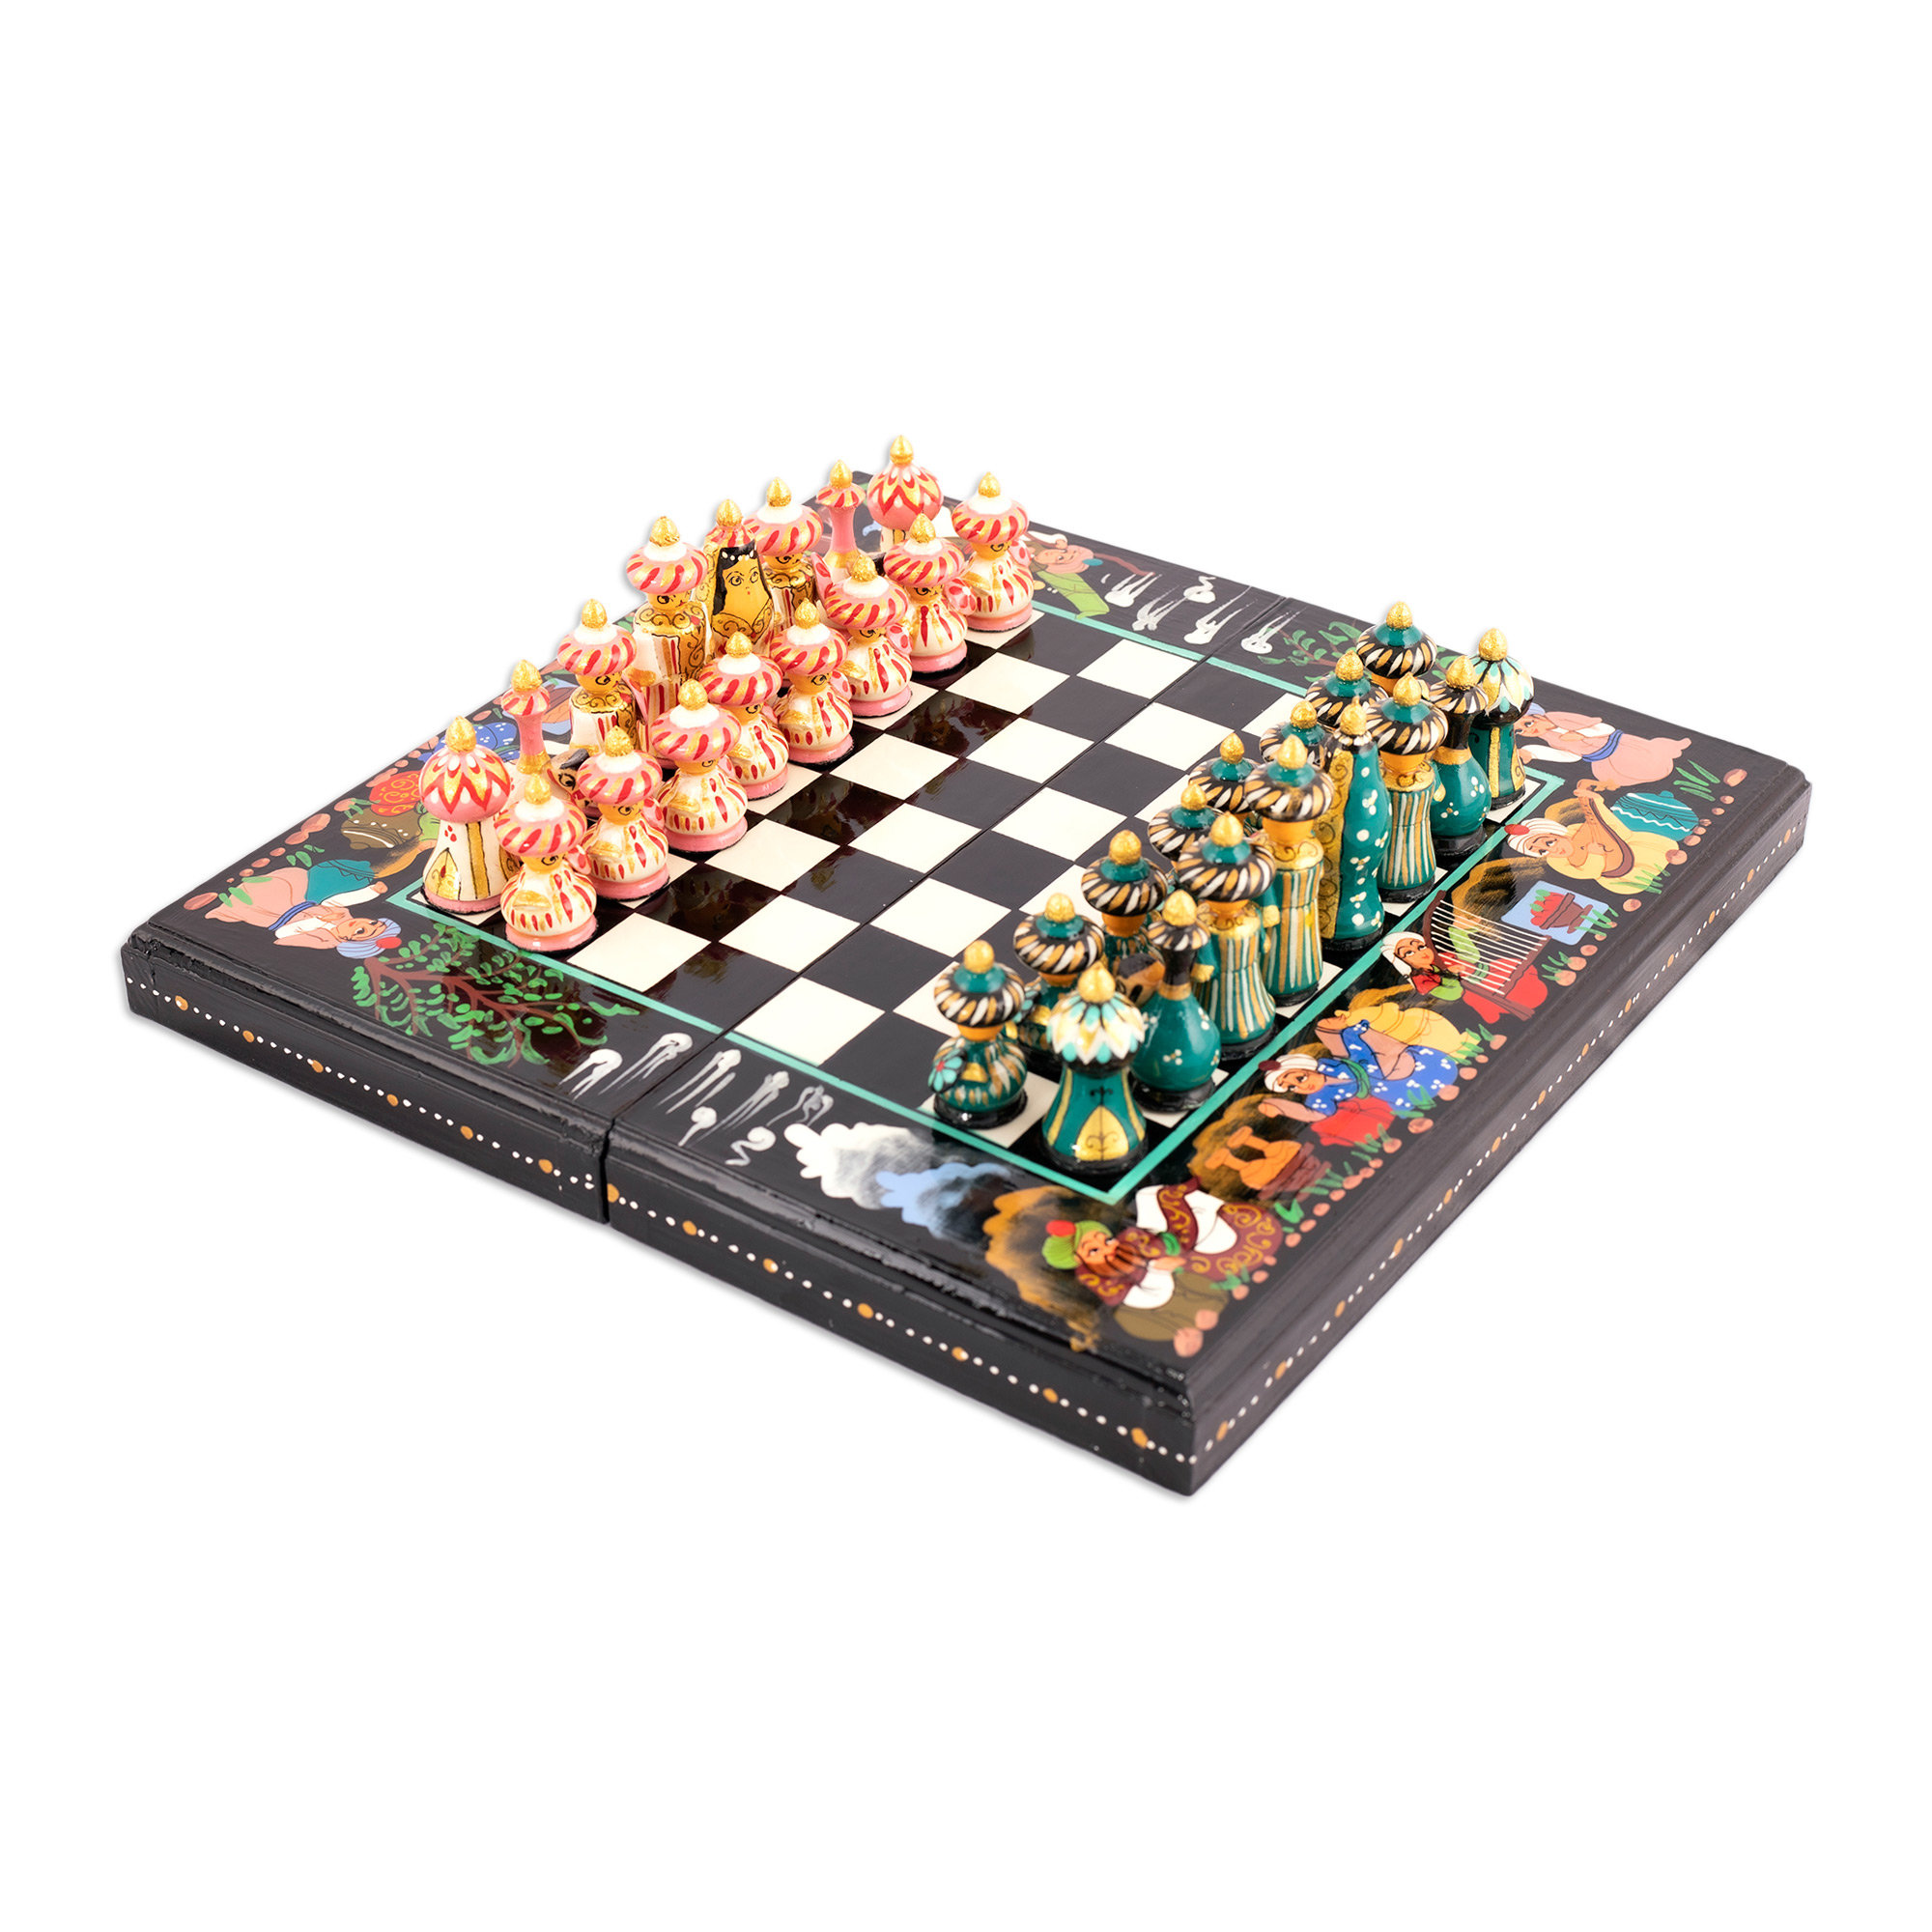 Novica 2 Player Wood Chess And Checkers Set